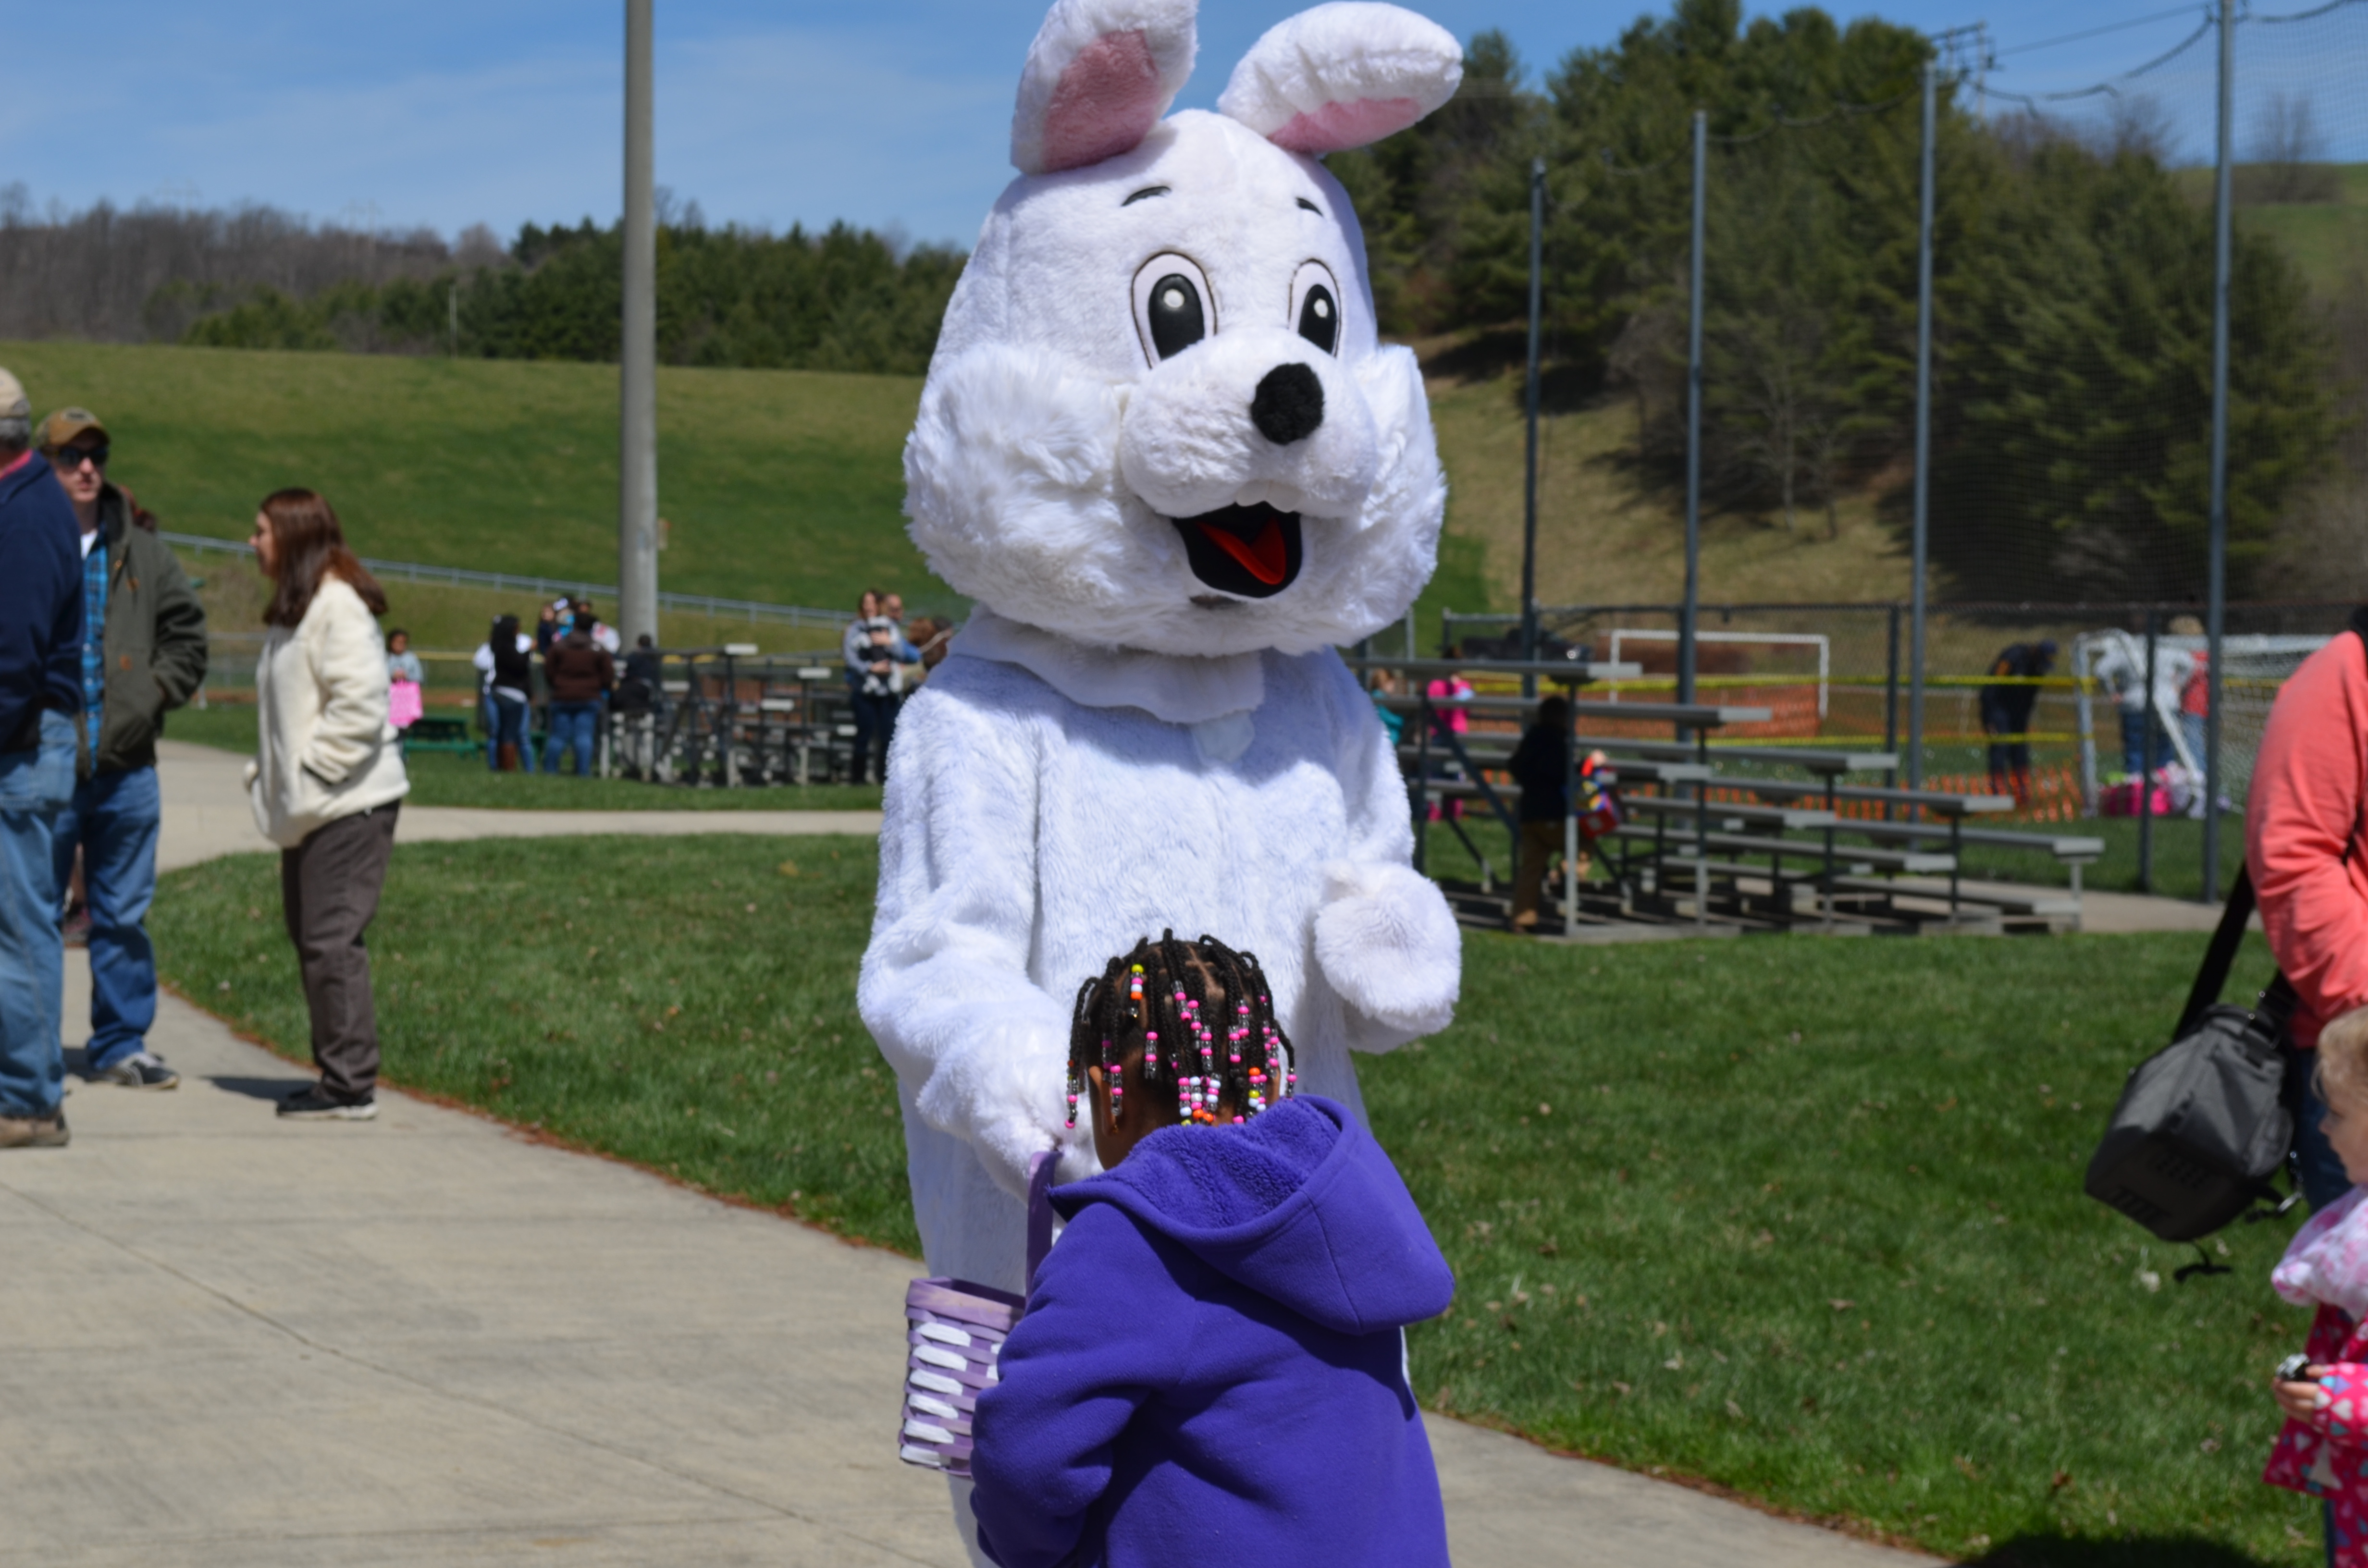 Easter Egg Hunt – RESCHEDULED to March 26, 2016